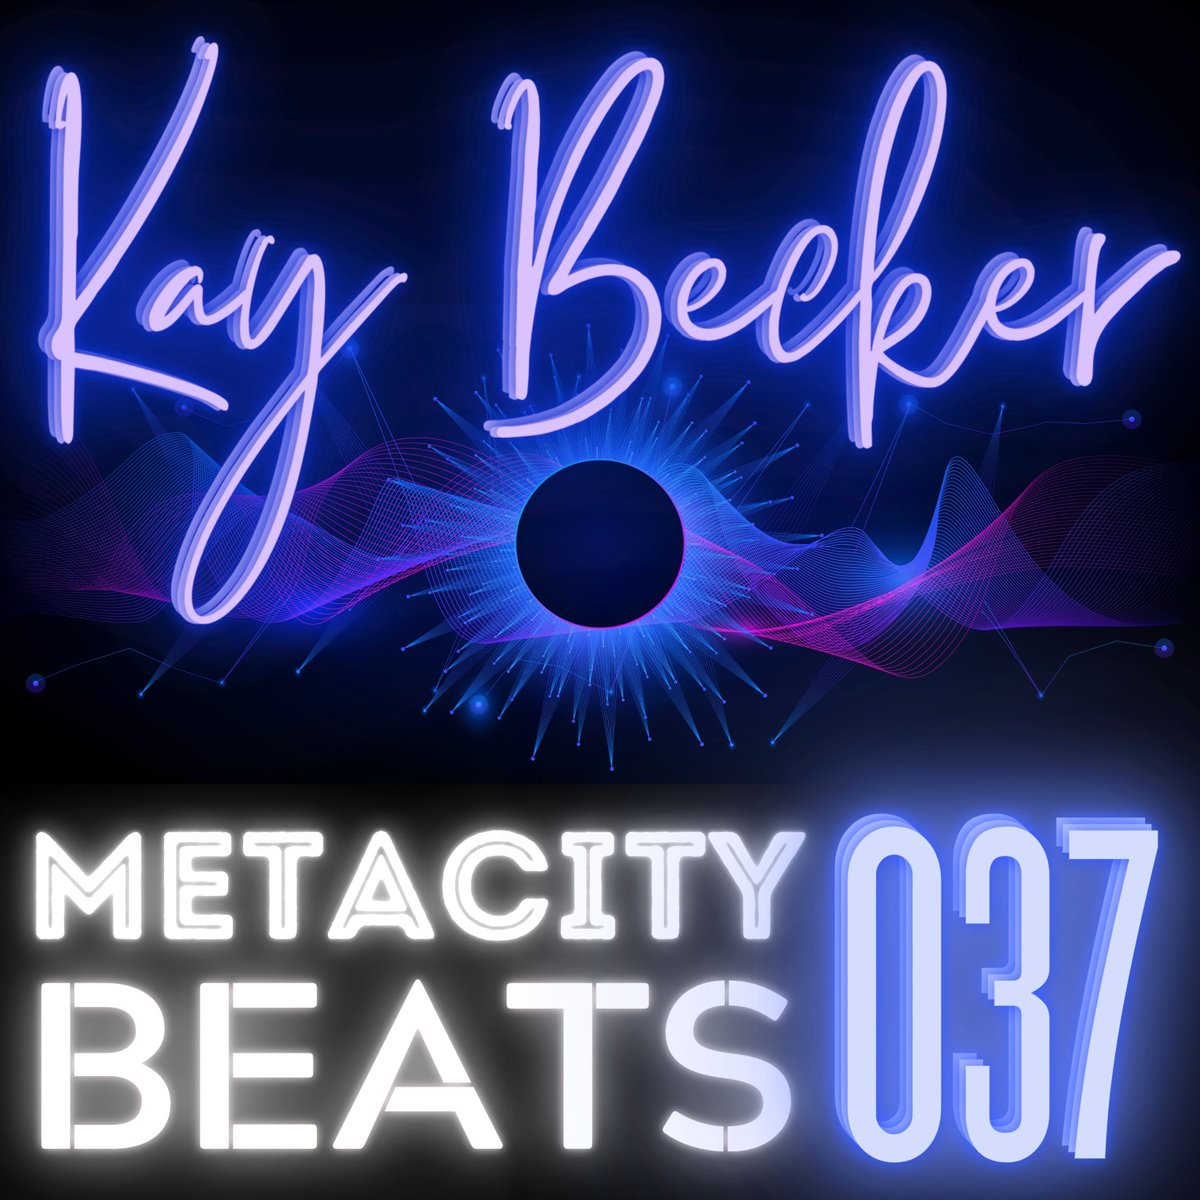 I'd like to bring you on a beautiful #MelodicTechno  Spring Ride. 😎

I think I might have just done that right here with MetaCity Beats 037. Come check it out. 🌼

#MIXCLOUD
mixcloud.com/kaybecker/meta…

#APPLEPODCASTS
podcasts.apple.com/us/podcast/met…